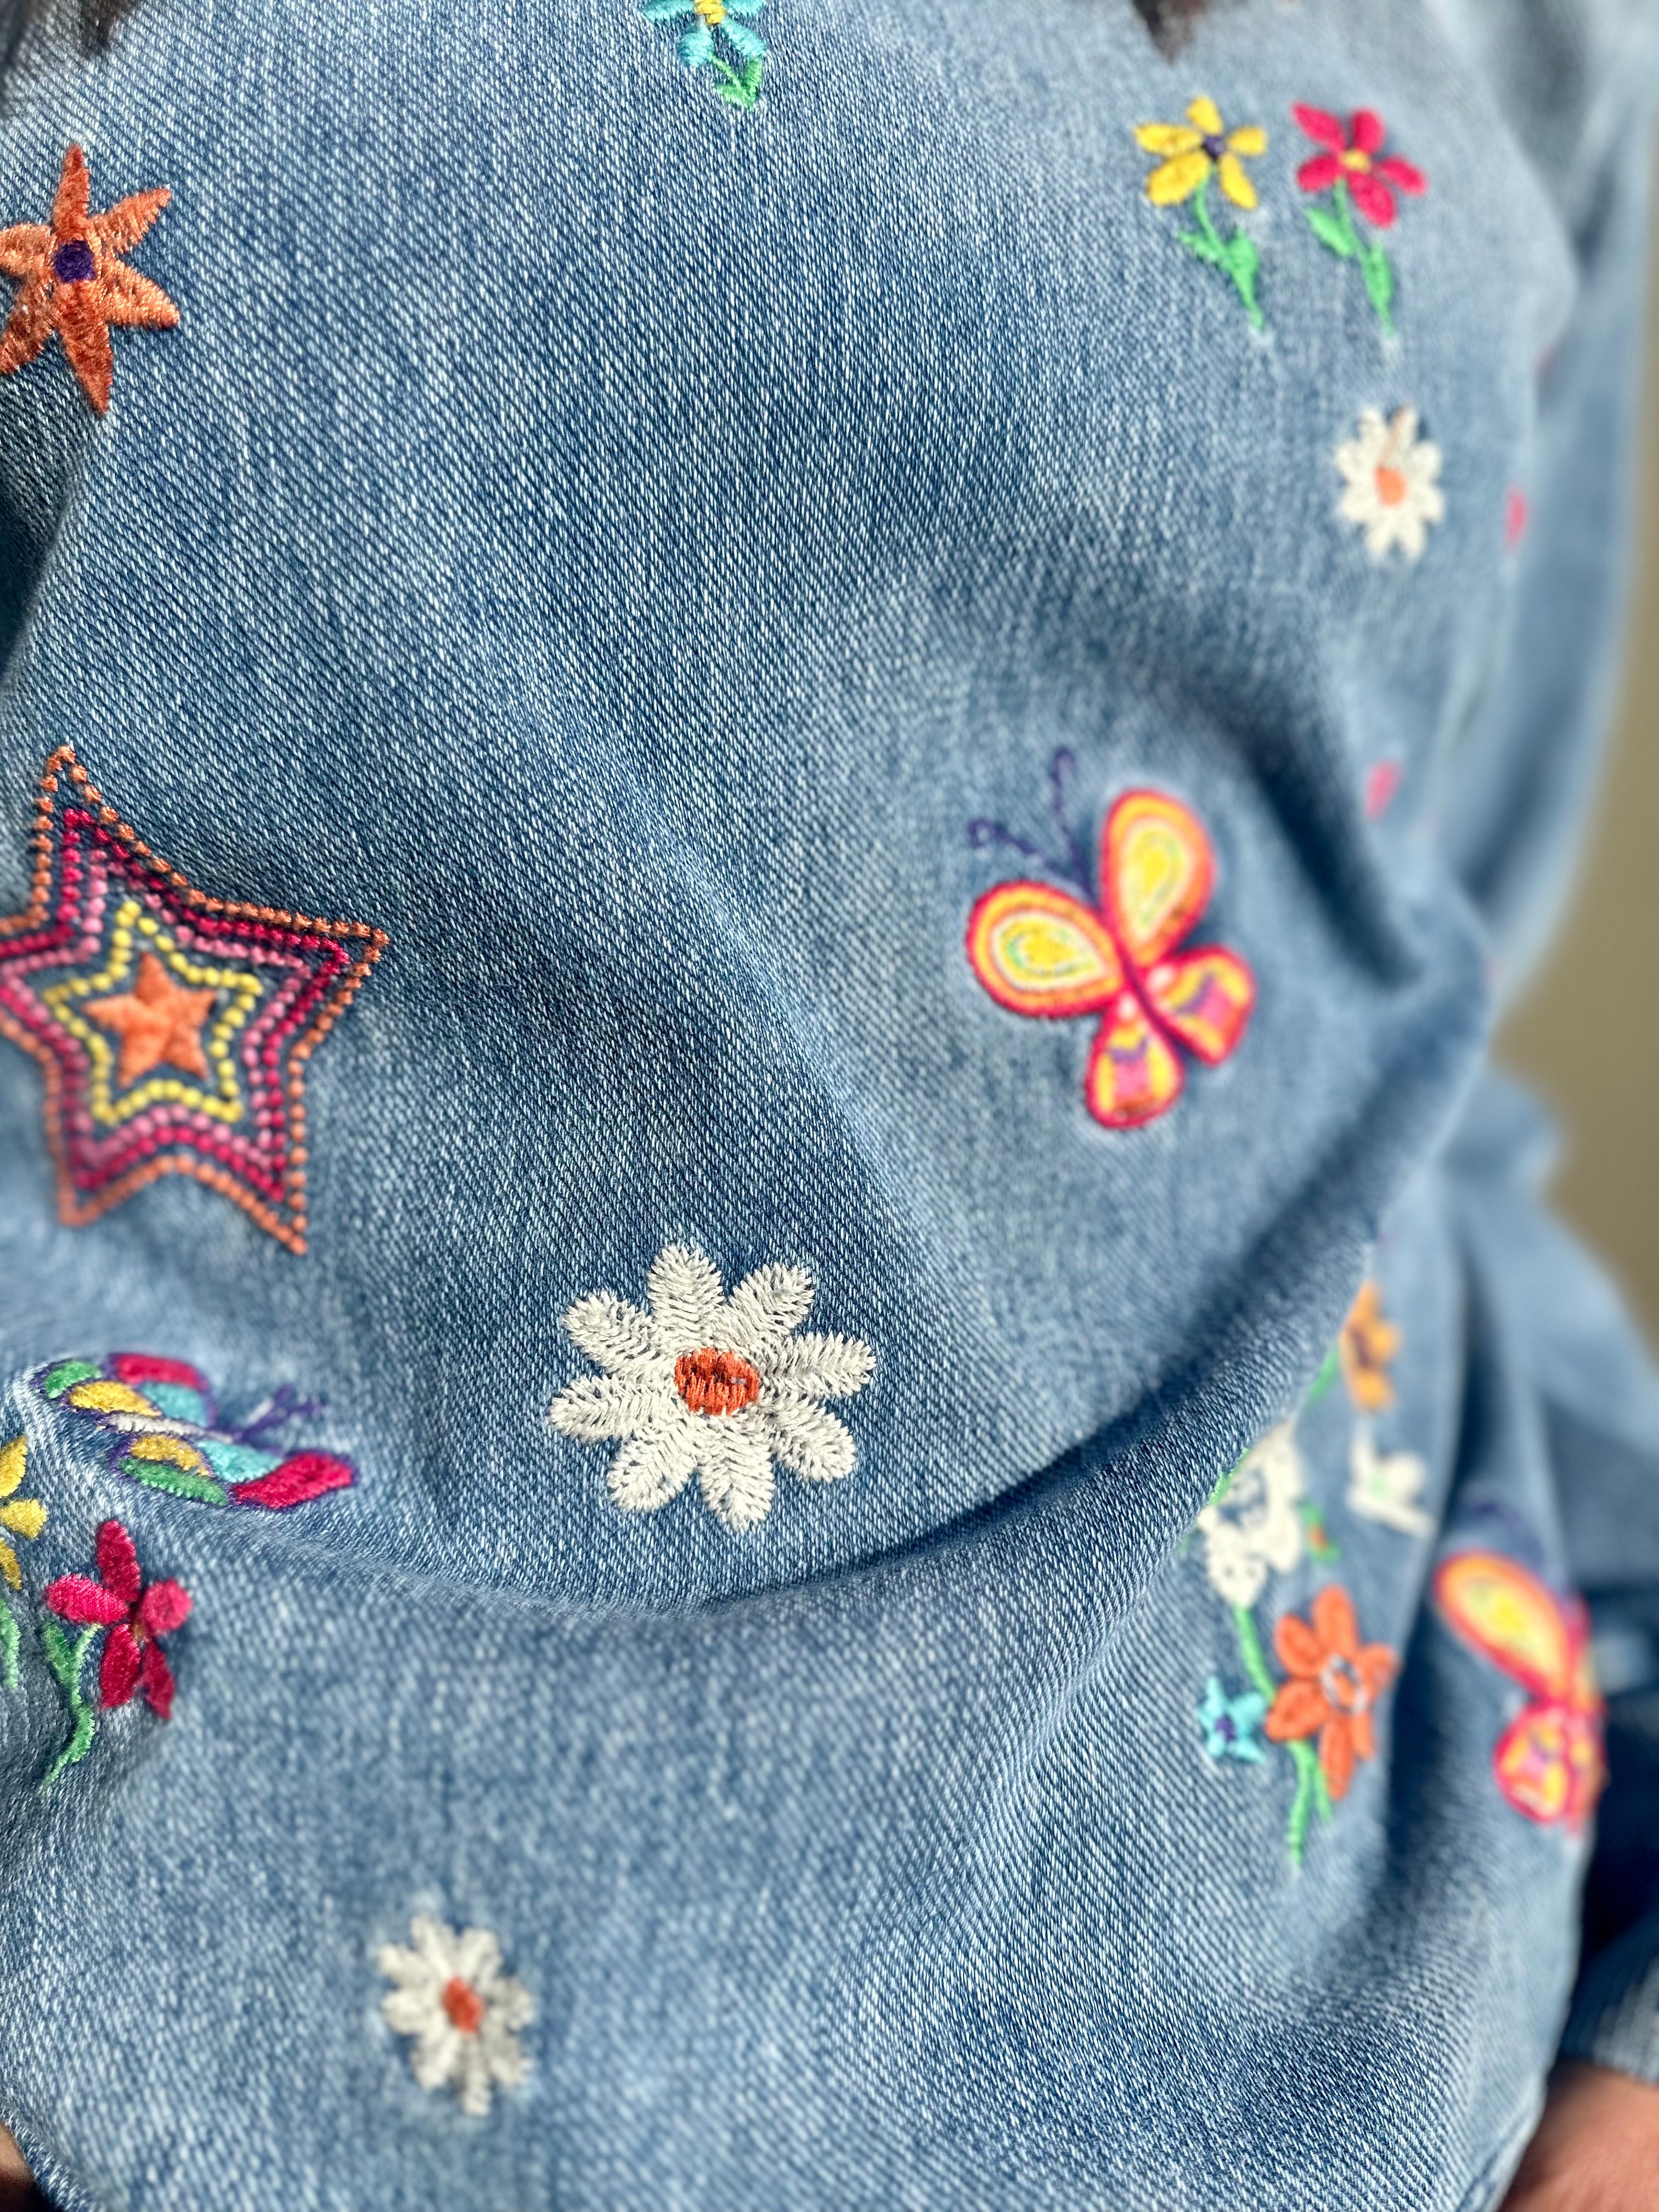 Kelly Sketchbook Star Butterfly & Floral Embroidery Sweater  - Denim details 2